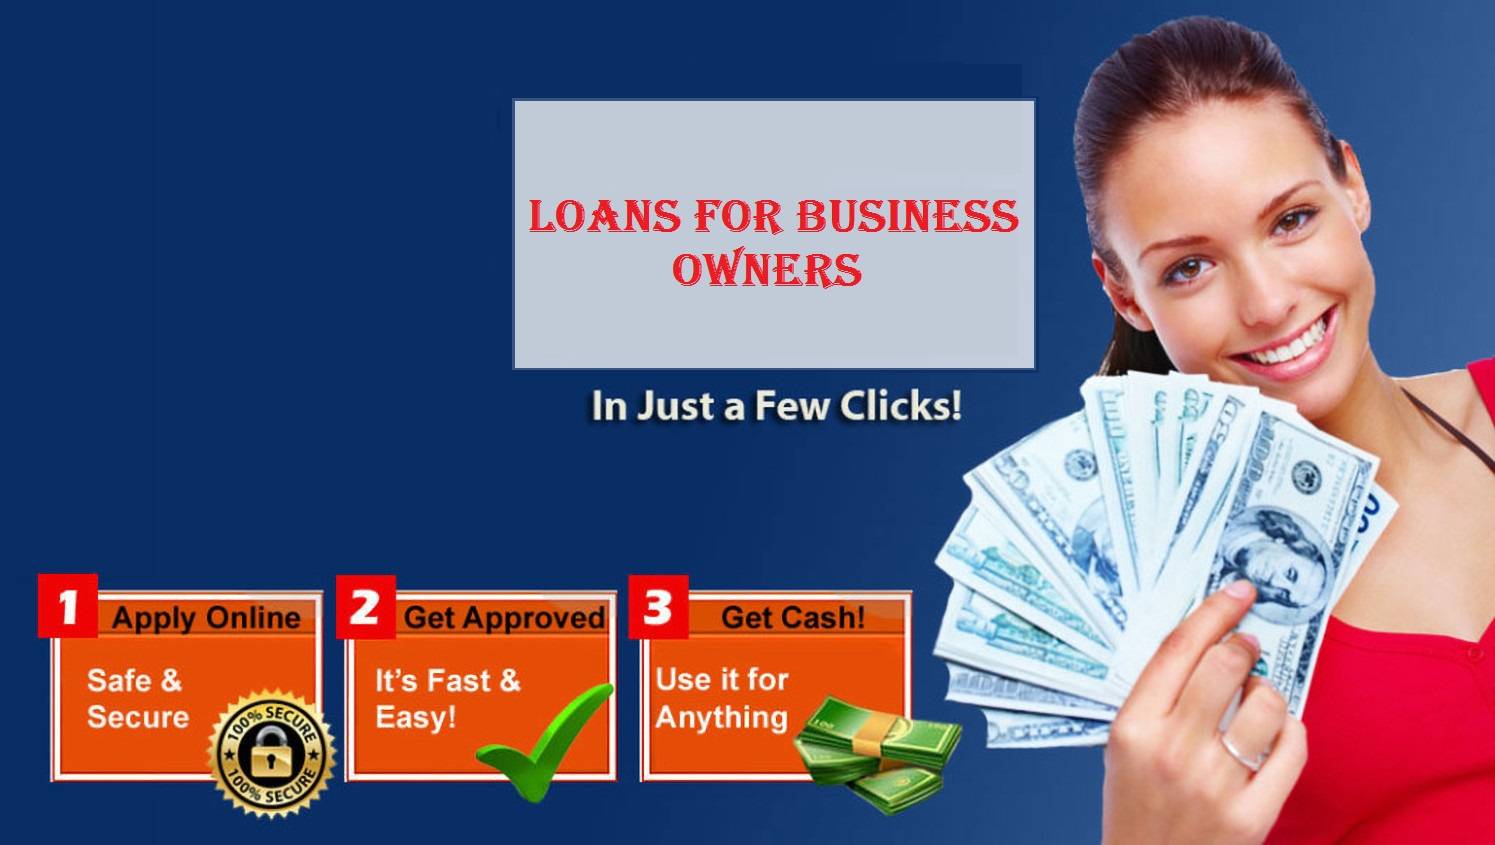 Loans for Business Owners